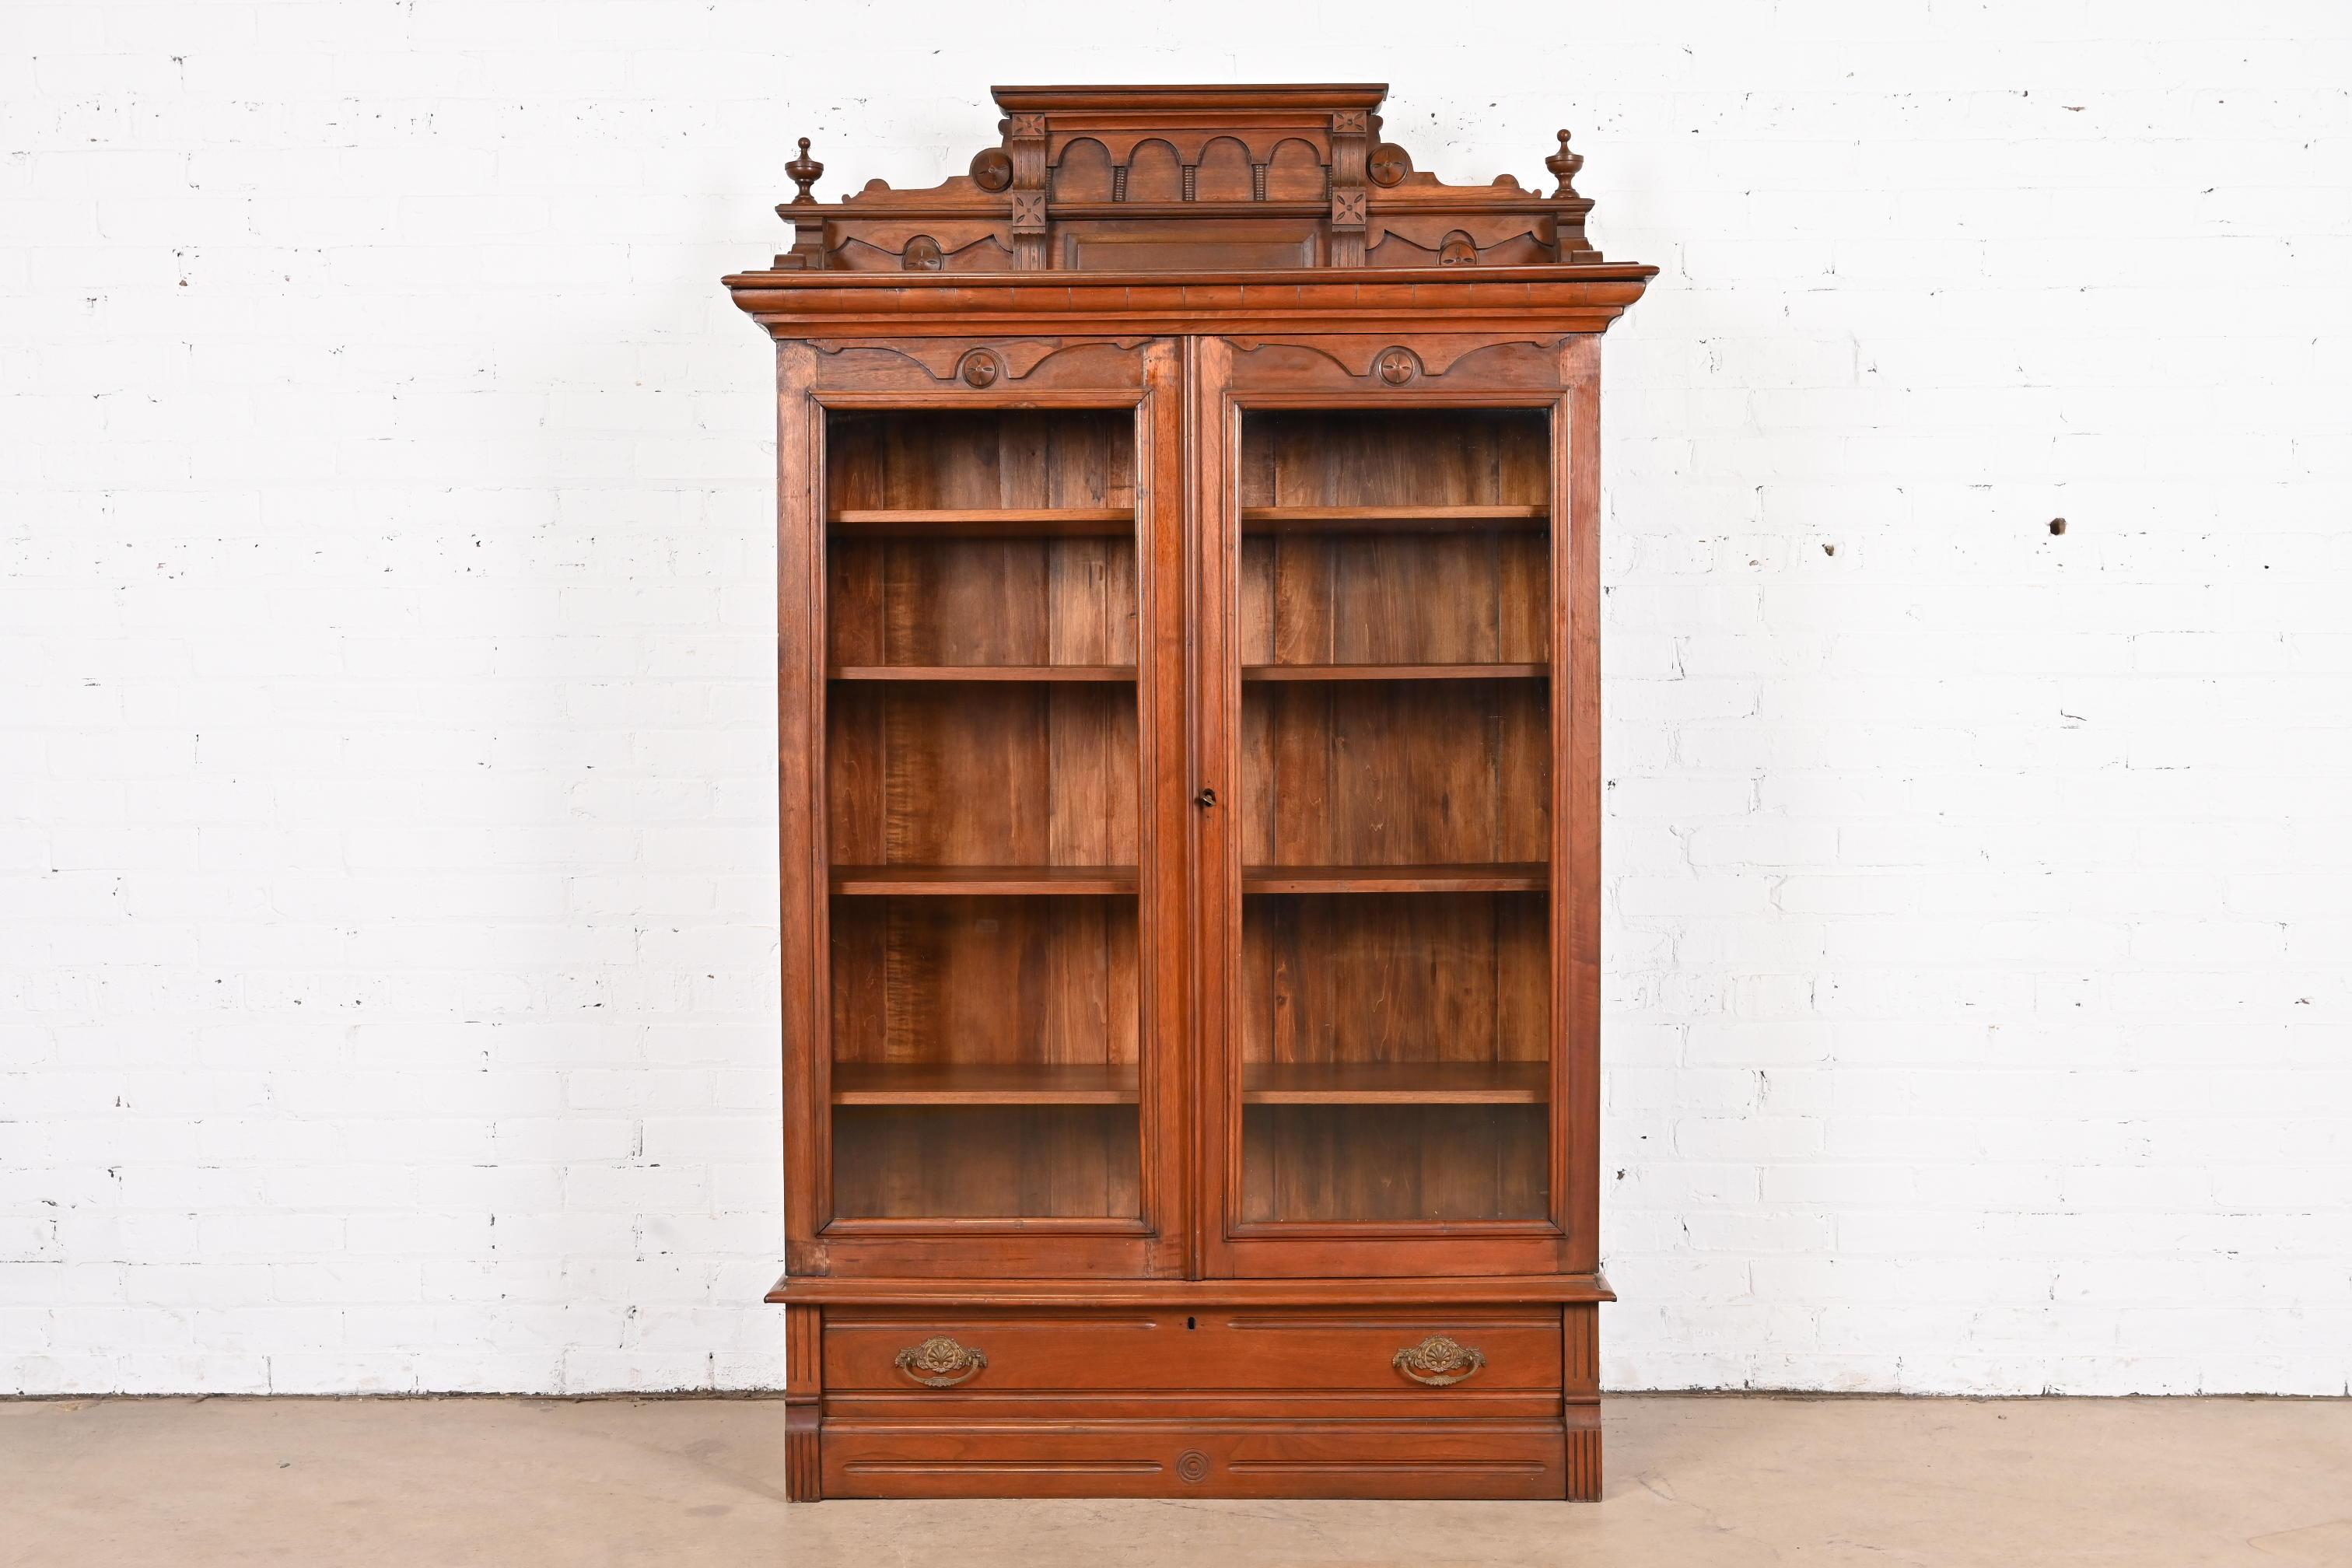 An outstanding antique Eastlake Victorian bookcase cabinet

In the manner of Herter Brothers

USA, circa 1860s

Carved walnut, with glass front doors and brass hardware.

Measures: 45.5